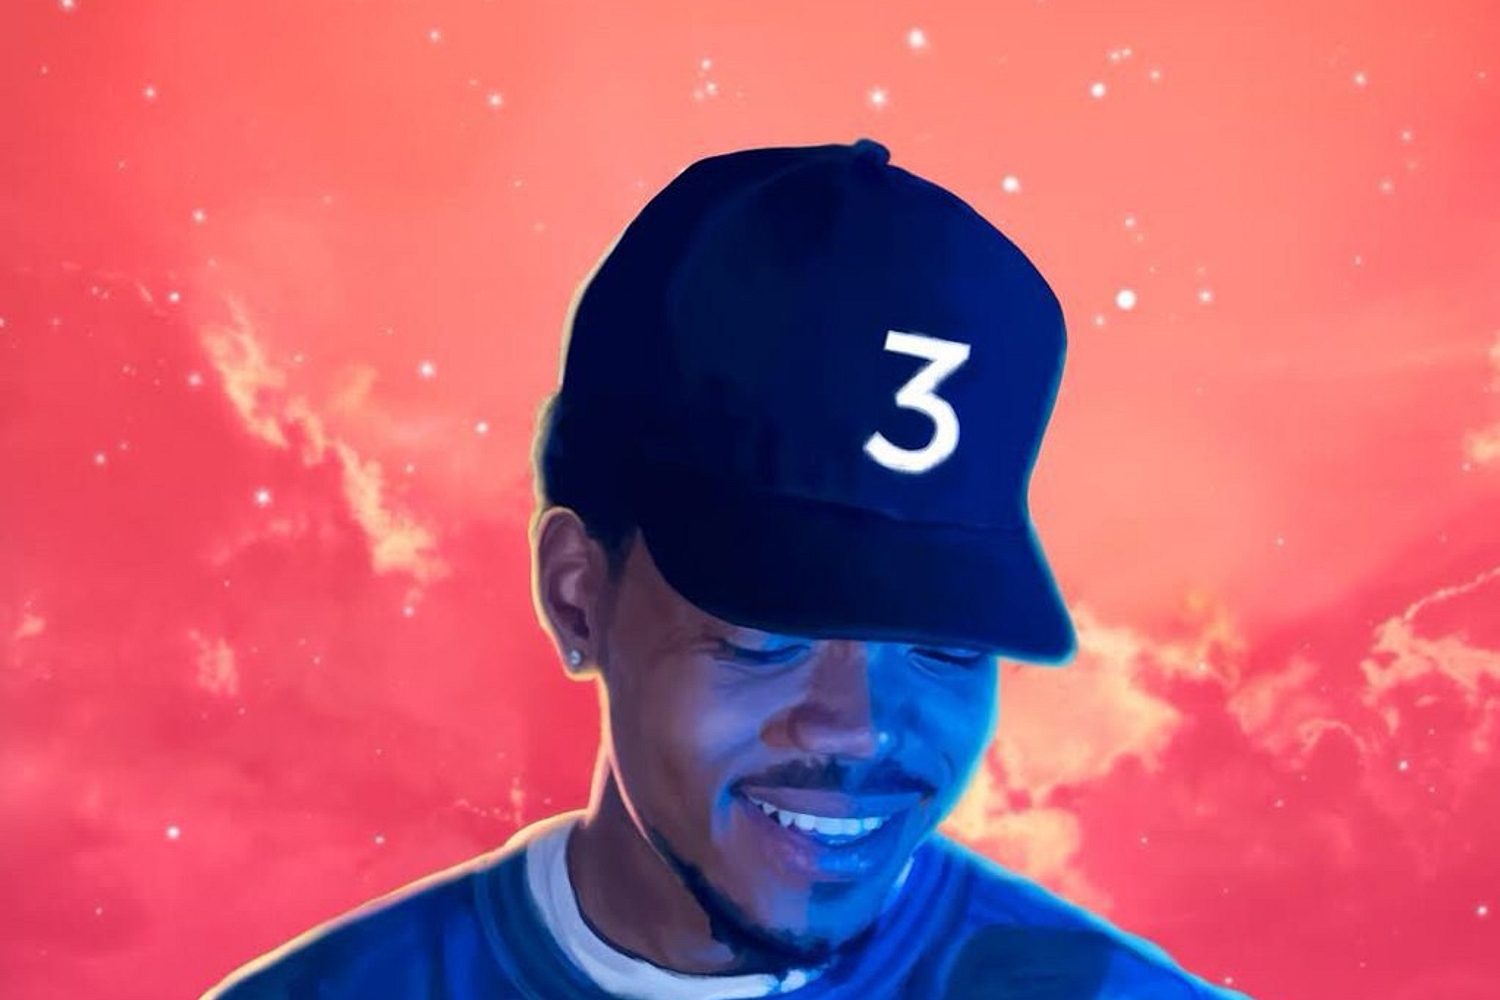 Watch Chance The Rapper bring ‘Coloring Book’ to Fallon